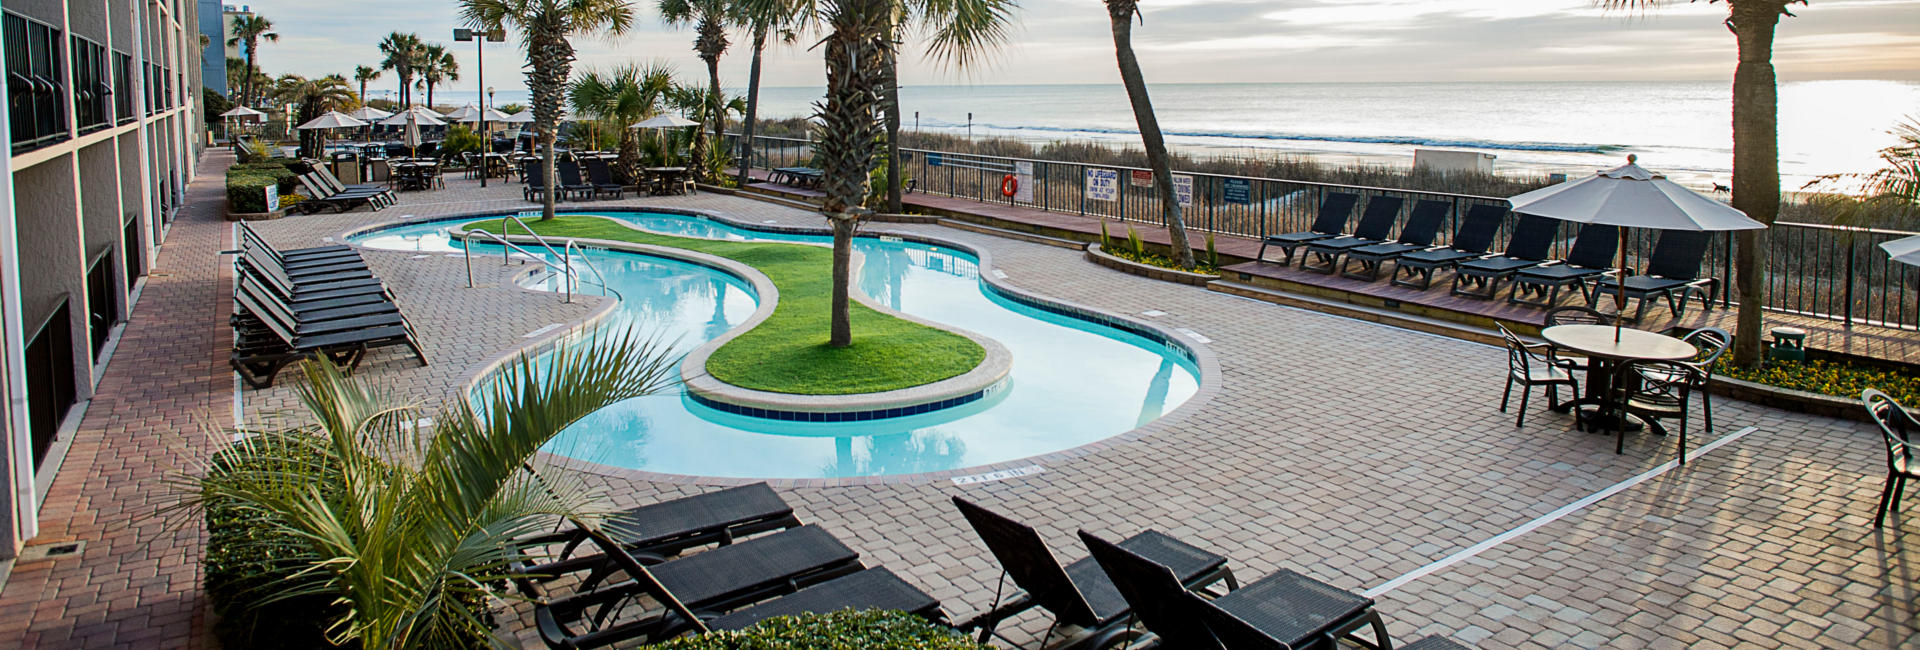 Compass Cove Ocean Front Lazy River 1920x650 1 